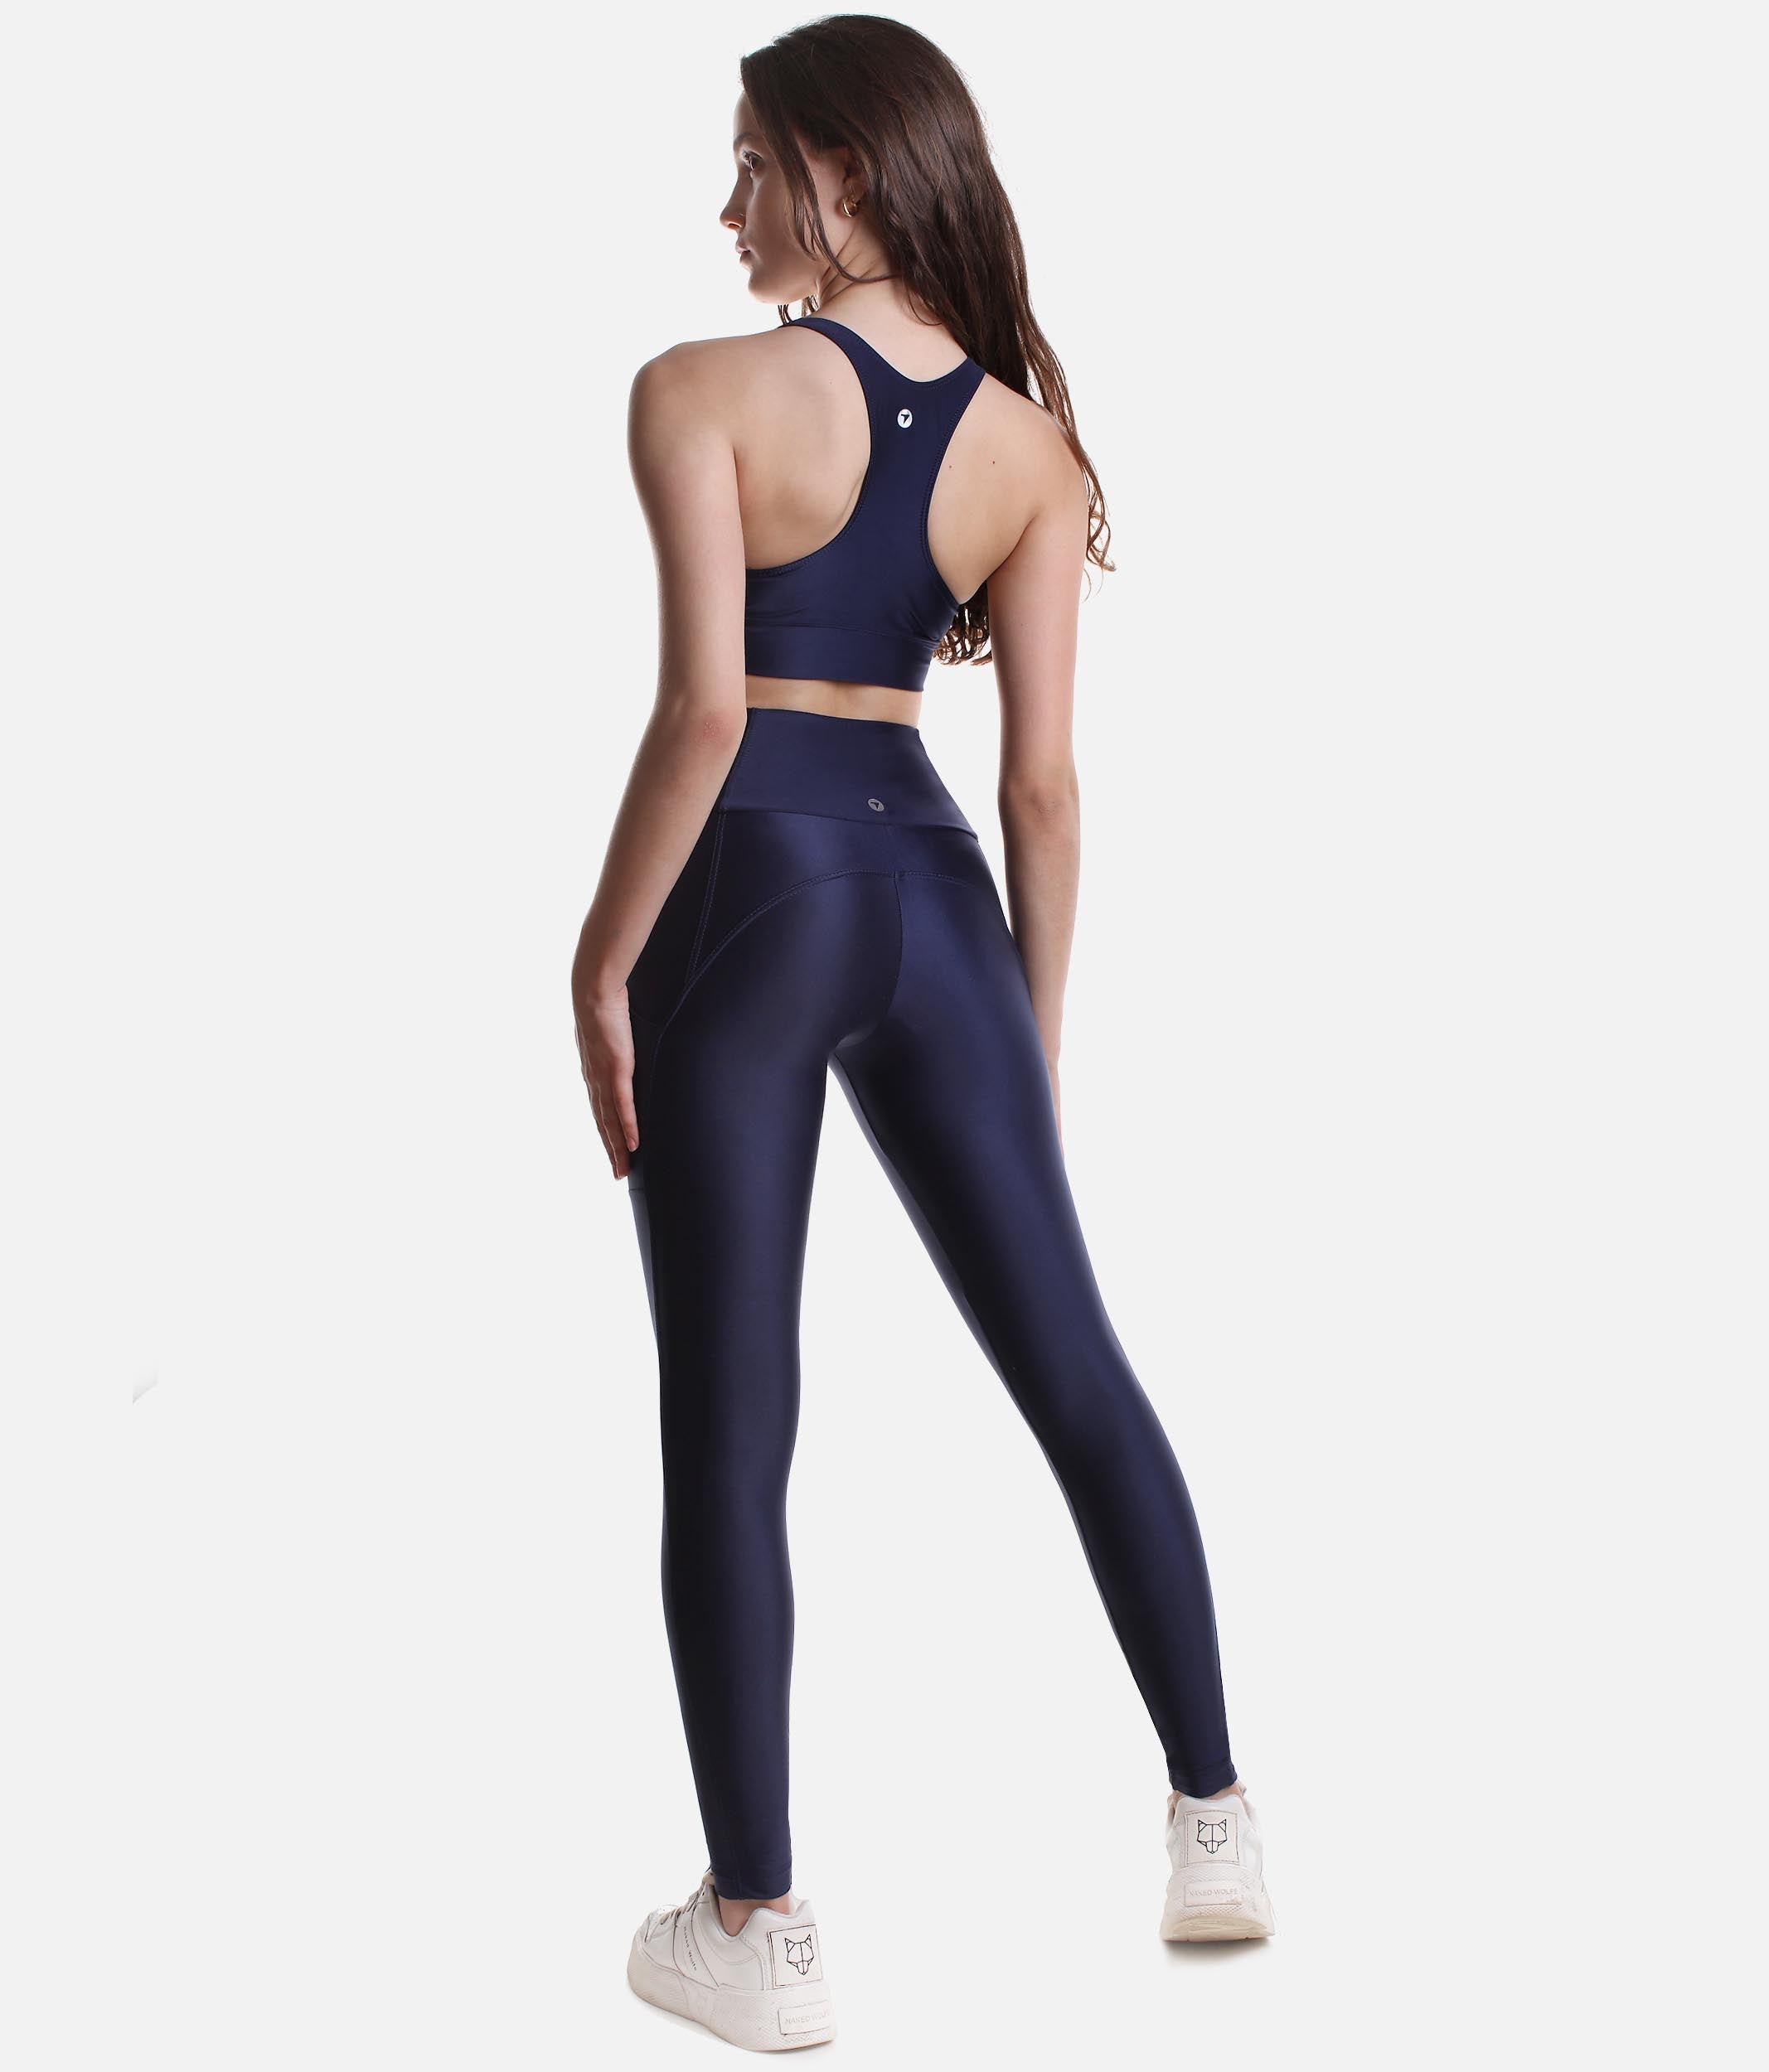 Navy Fade Leggings with pockets